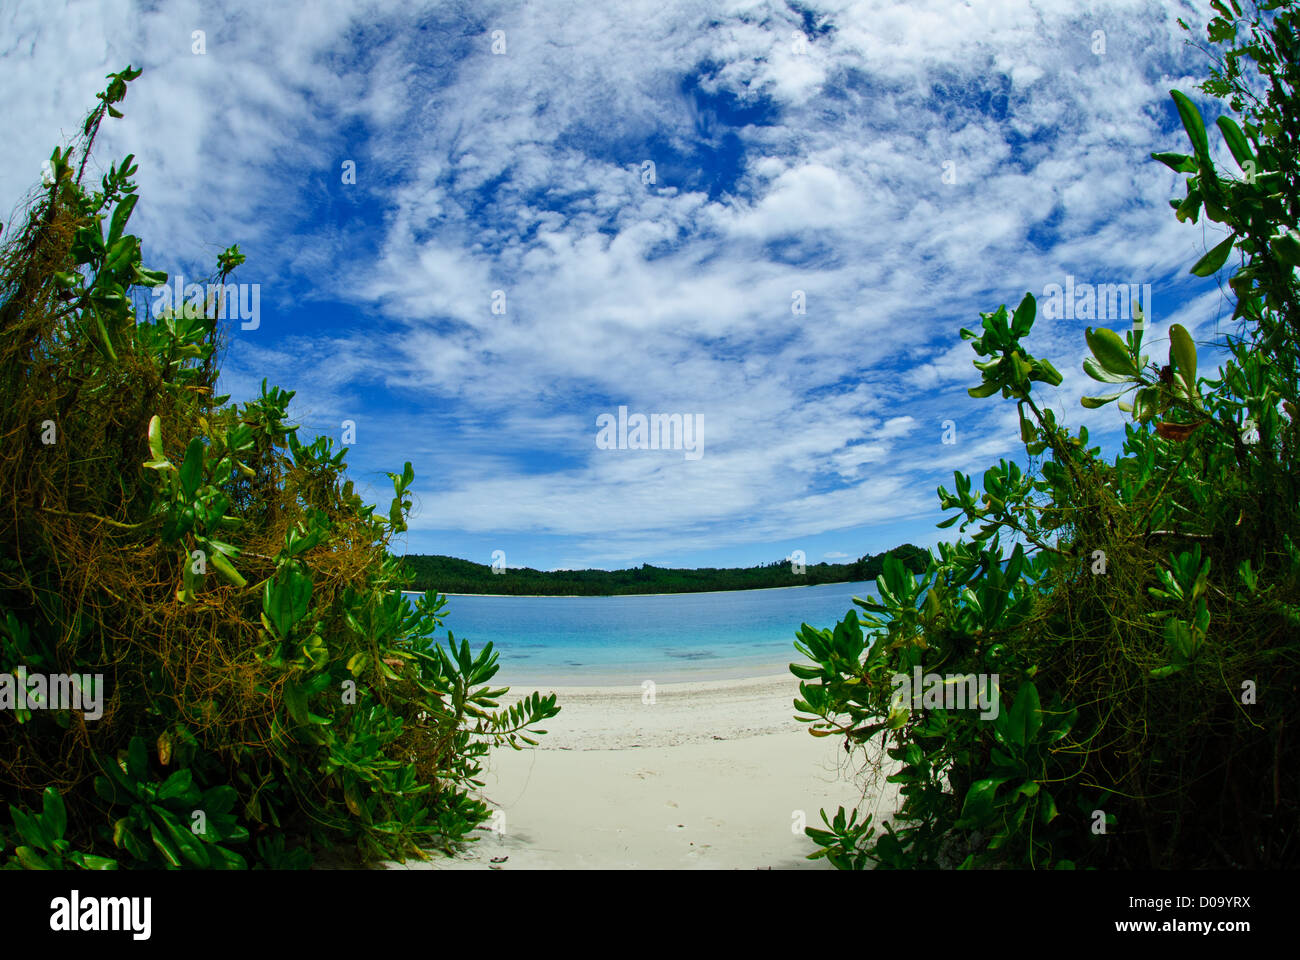 The white sand beach of Aloita island in the Mentawai, West Sumatra, Indonesia. A gem in the Indian Ocean Stock Photo